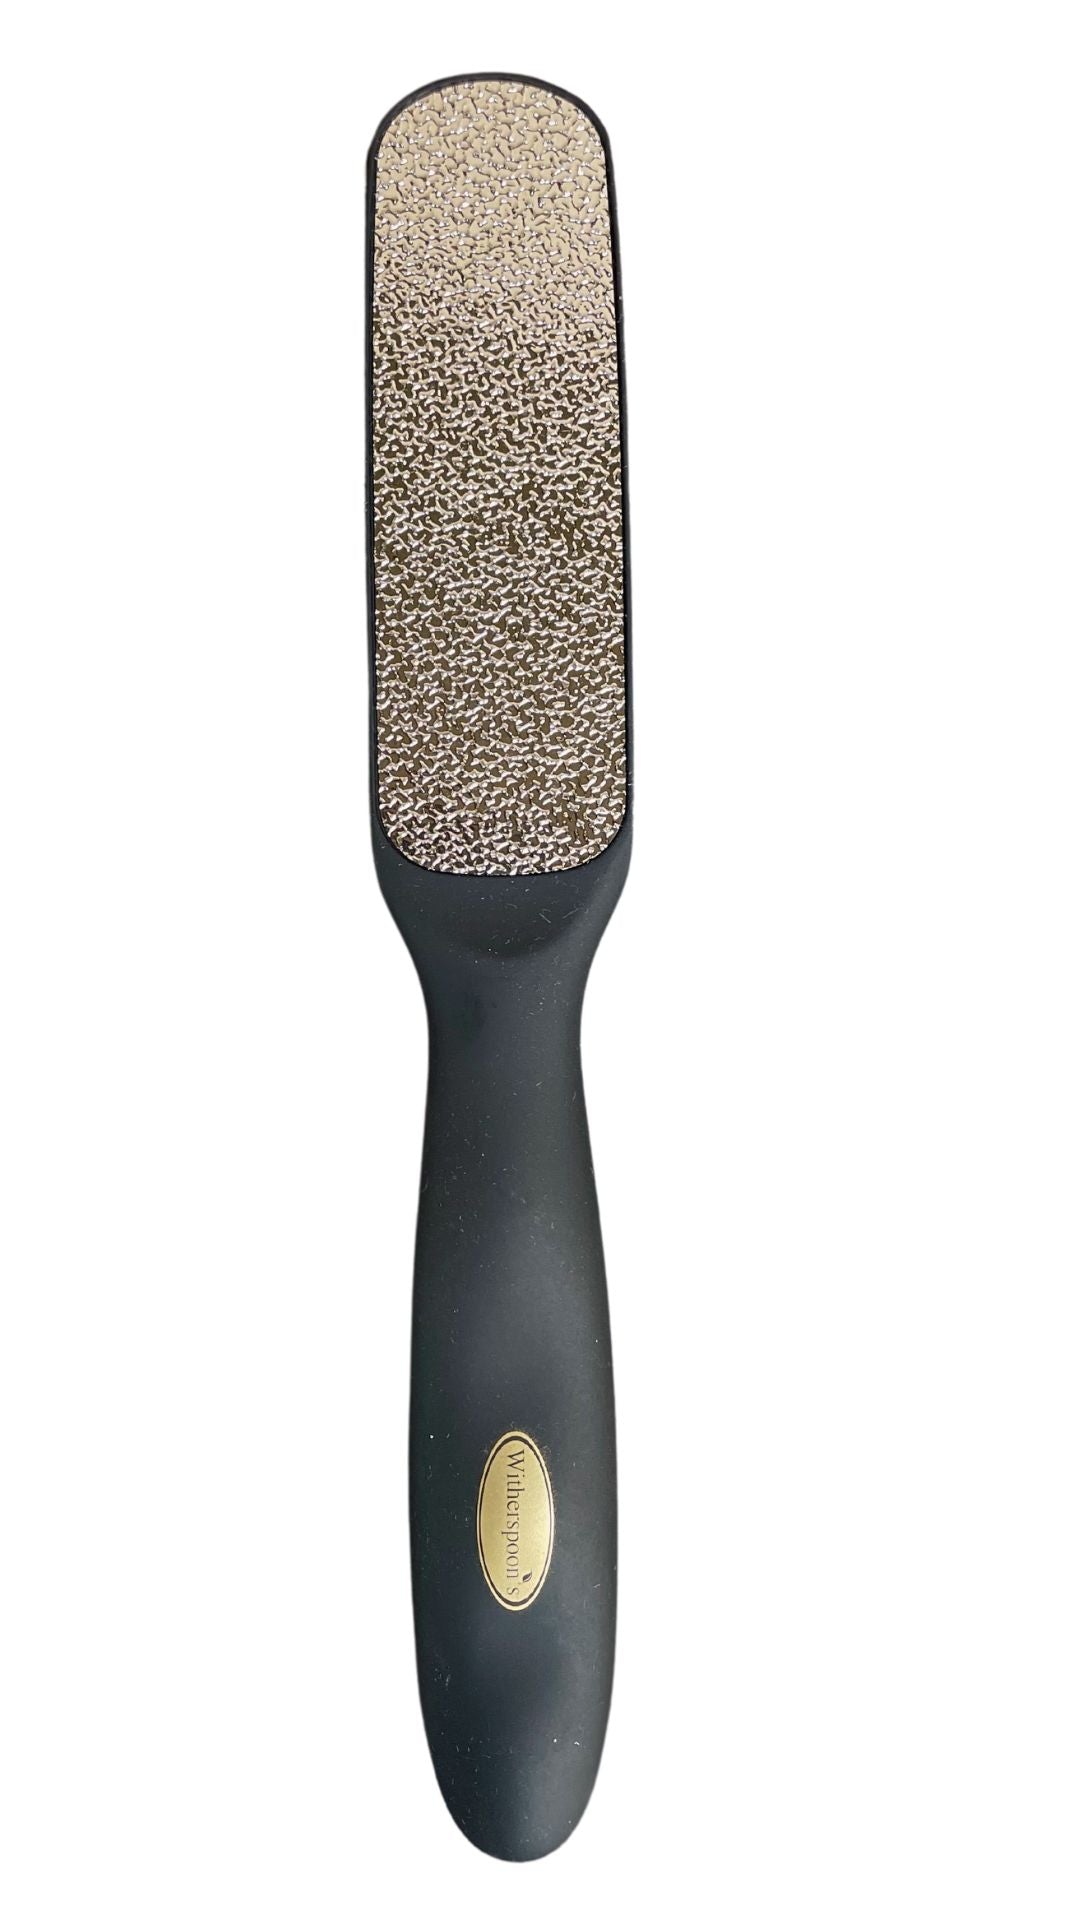 Witherspoons  black foot file. double sided with different plates for exfoliating dry cracked feet. Can be used wet or dry.